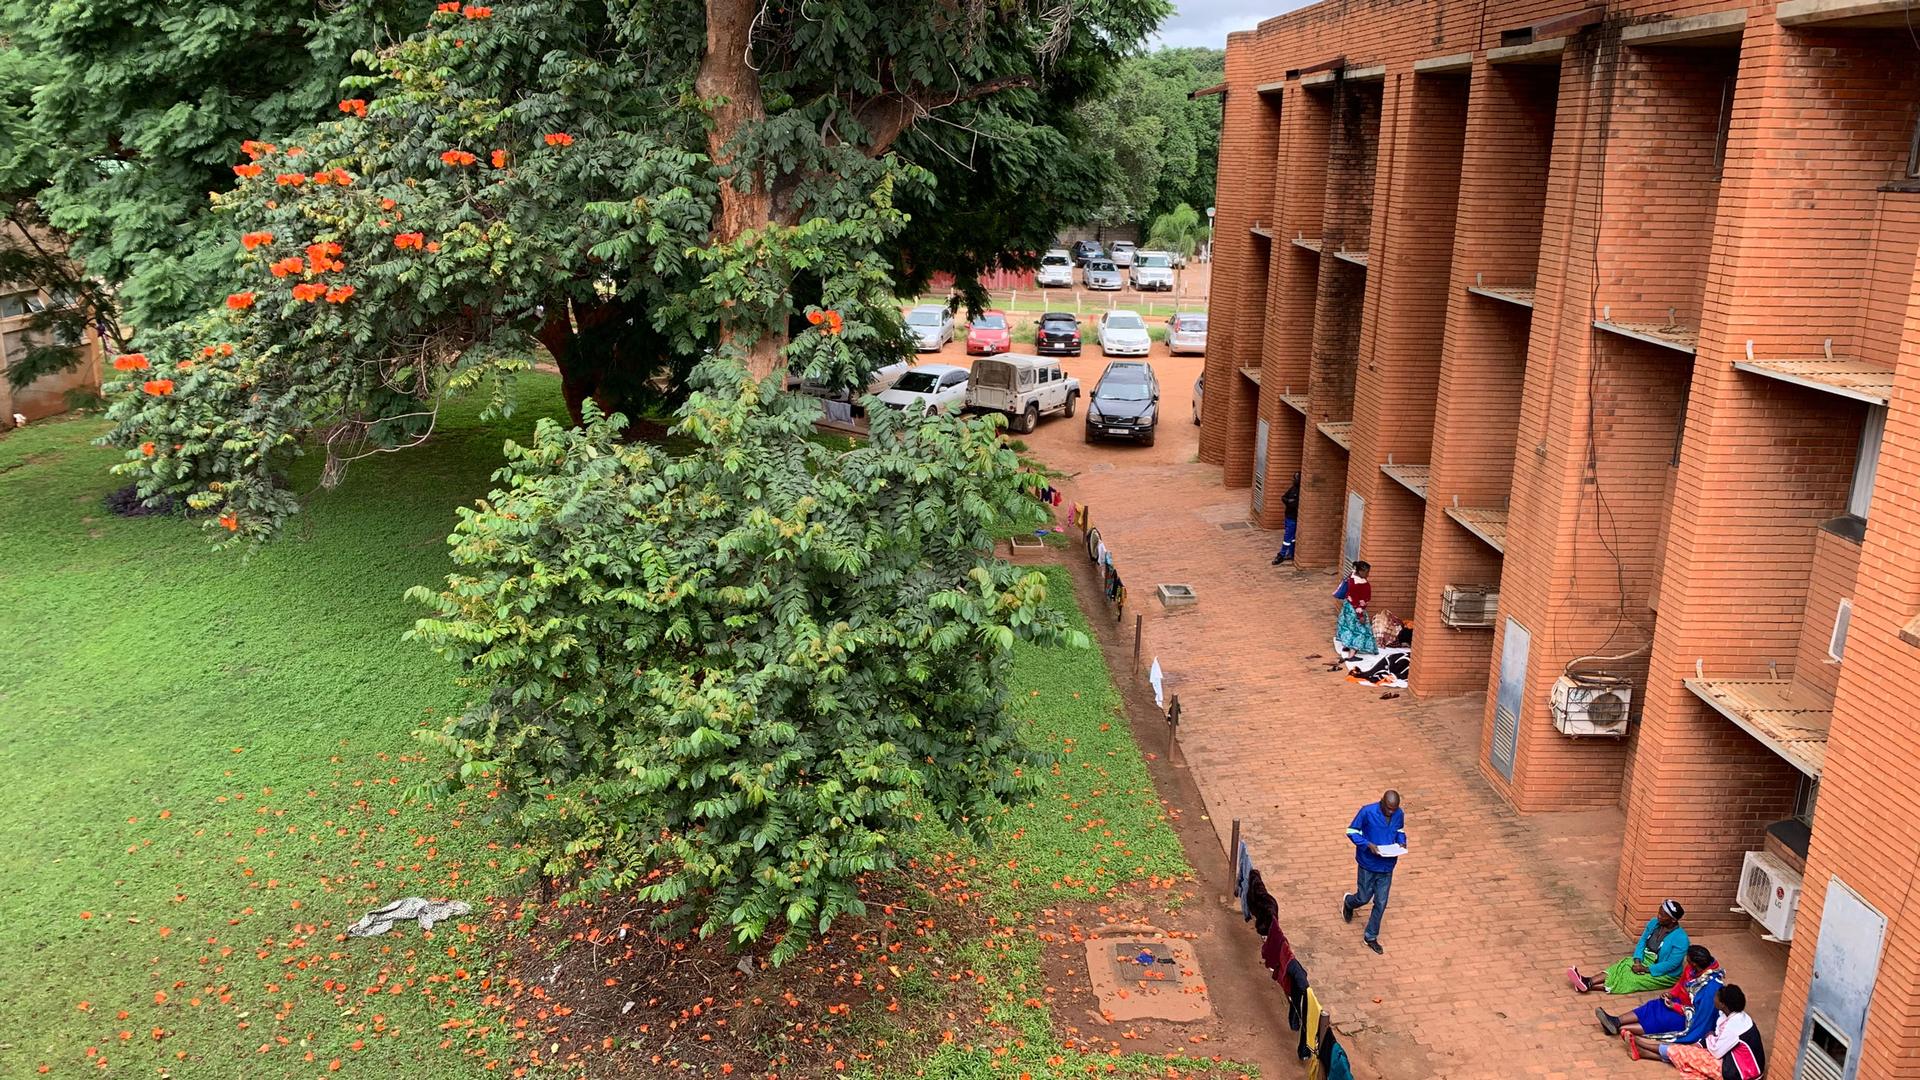 University Teaching Hospital in the capital Lusaka, Zambia is home to the first neurology residency program in the country. The program has trained seven neurologists since starting in 2018.